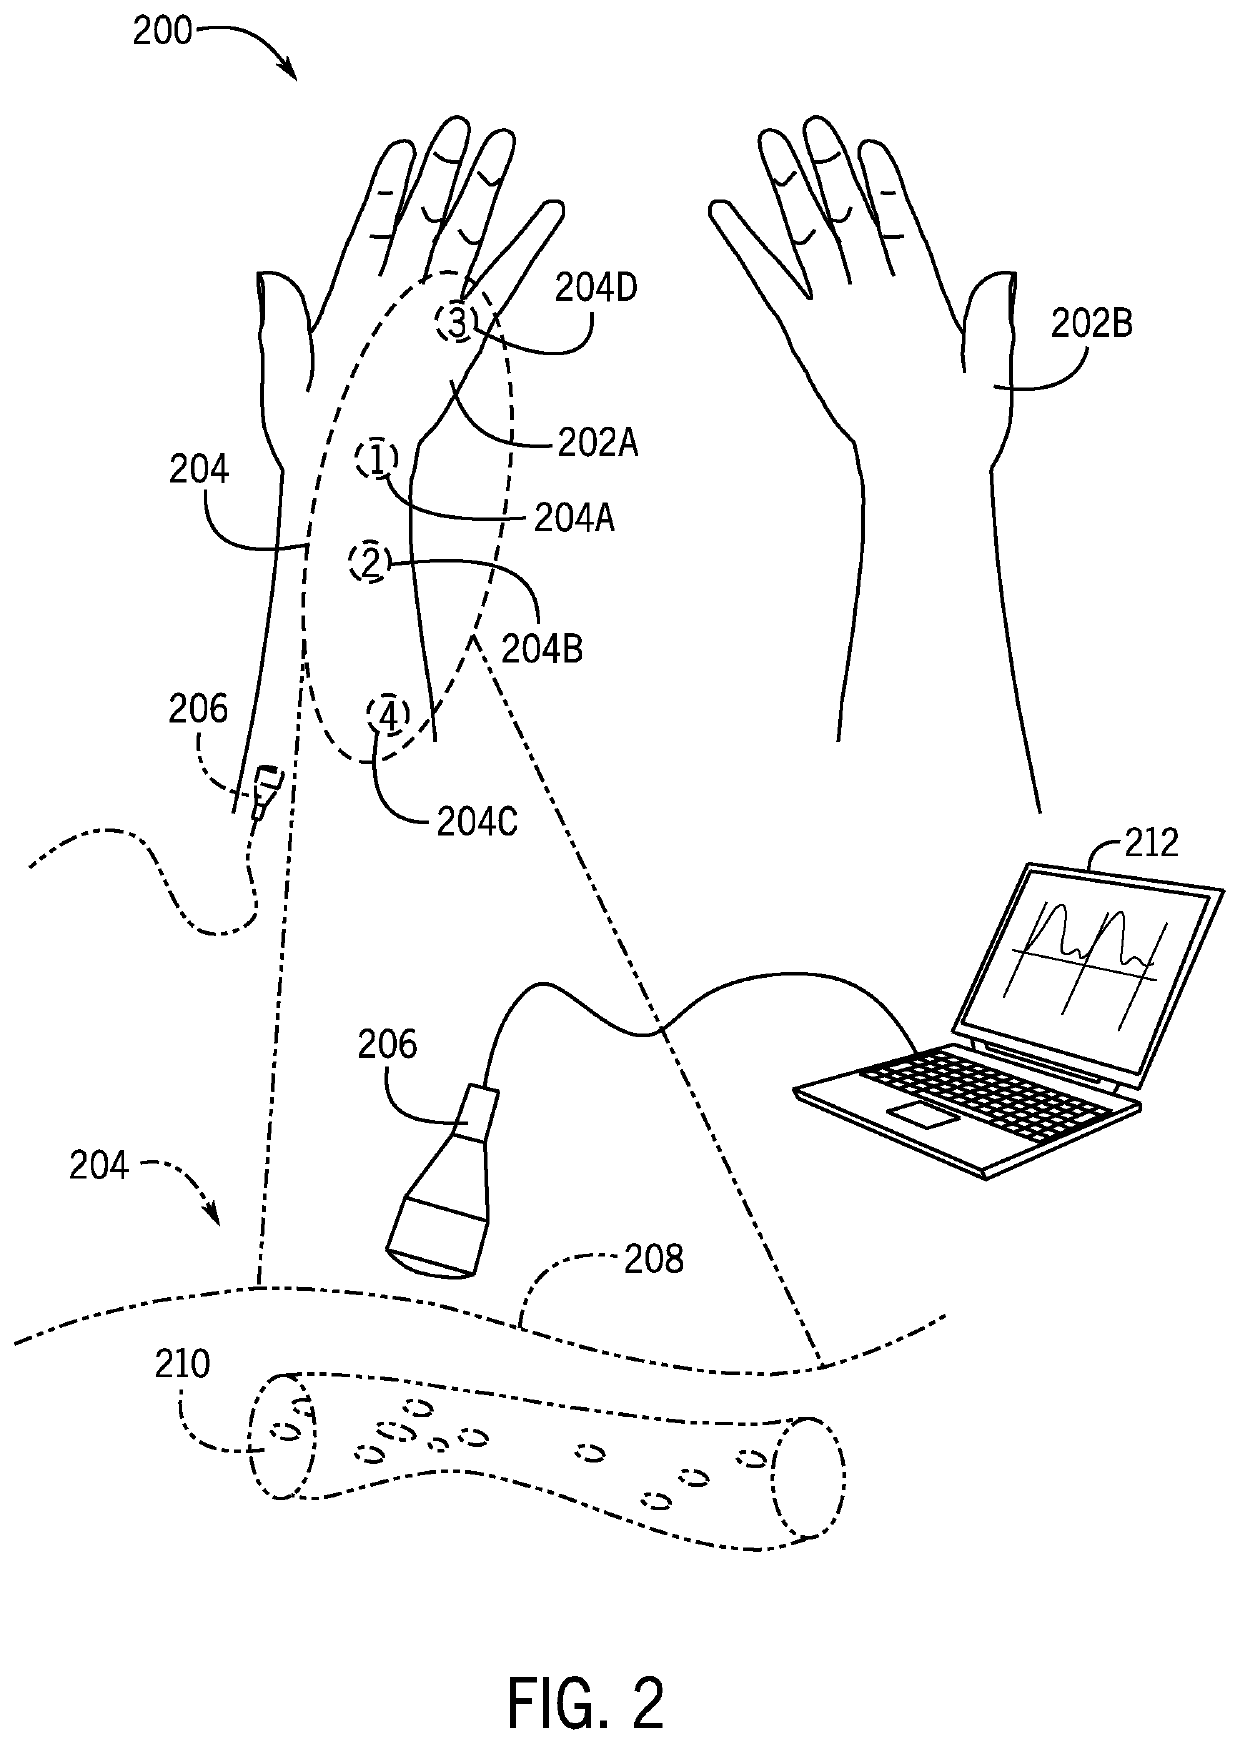 Computer-supported intraneural facilitation for vascular changes